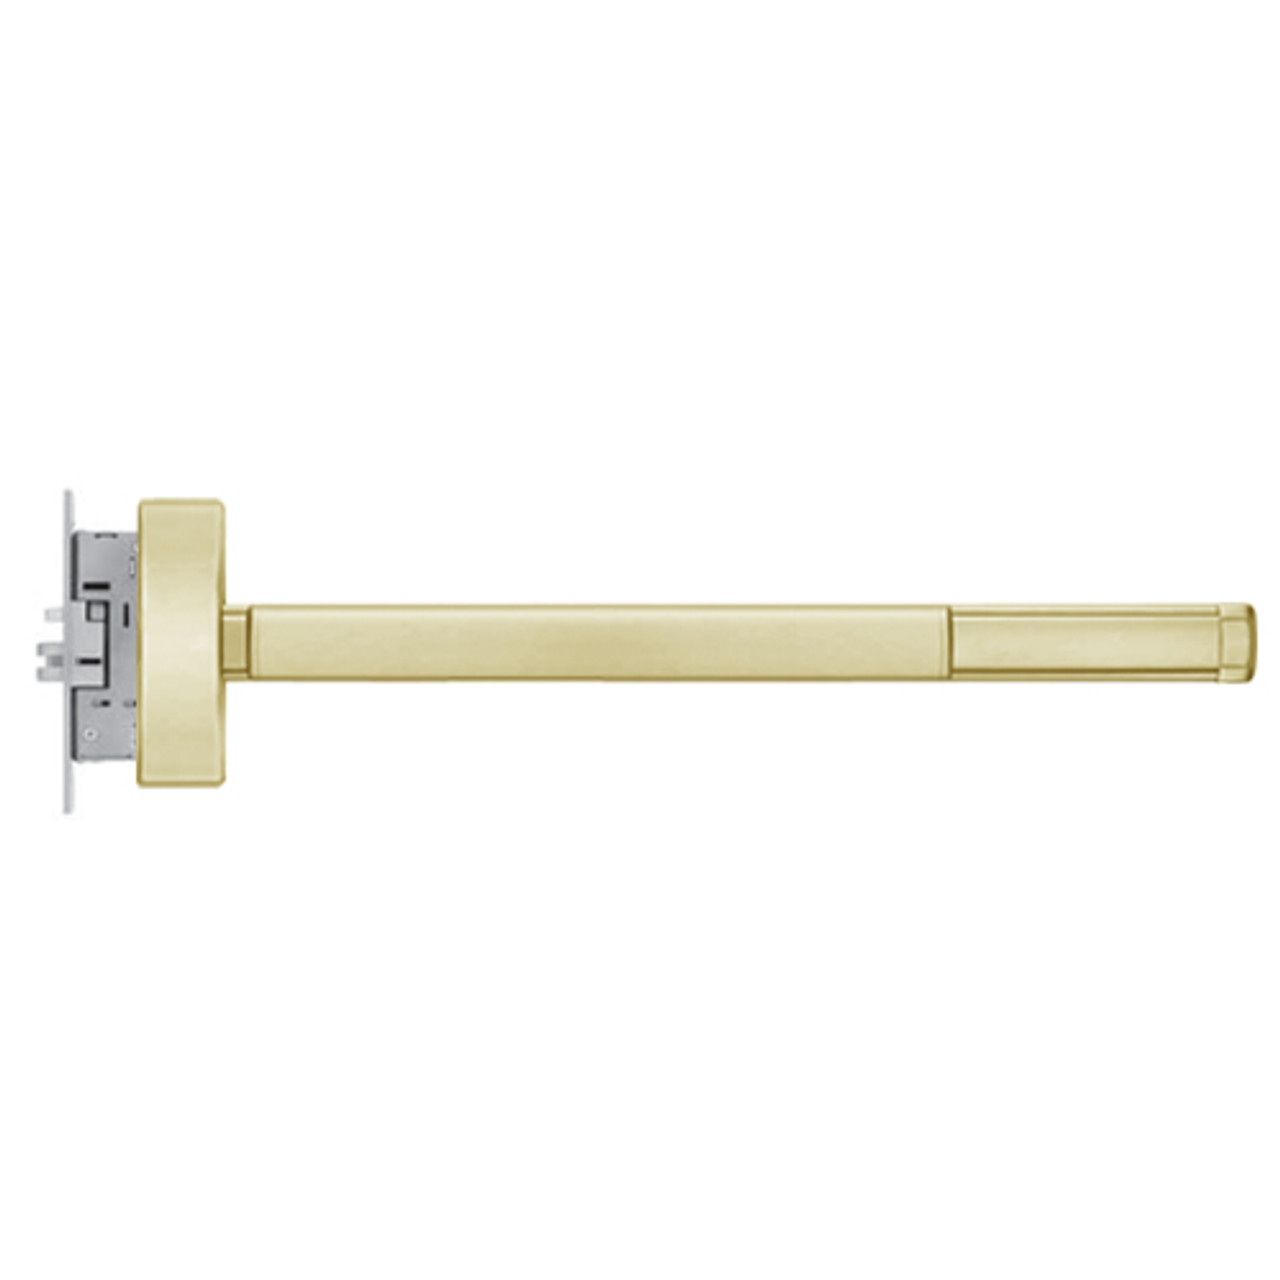 2303-RHR-606-48 PHI 2300 Series Non Fire Rated Apex Mortise Exit Device Prepped for Key Retracts Latchbolt in Satin Brass Finish